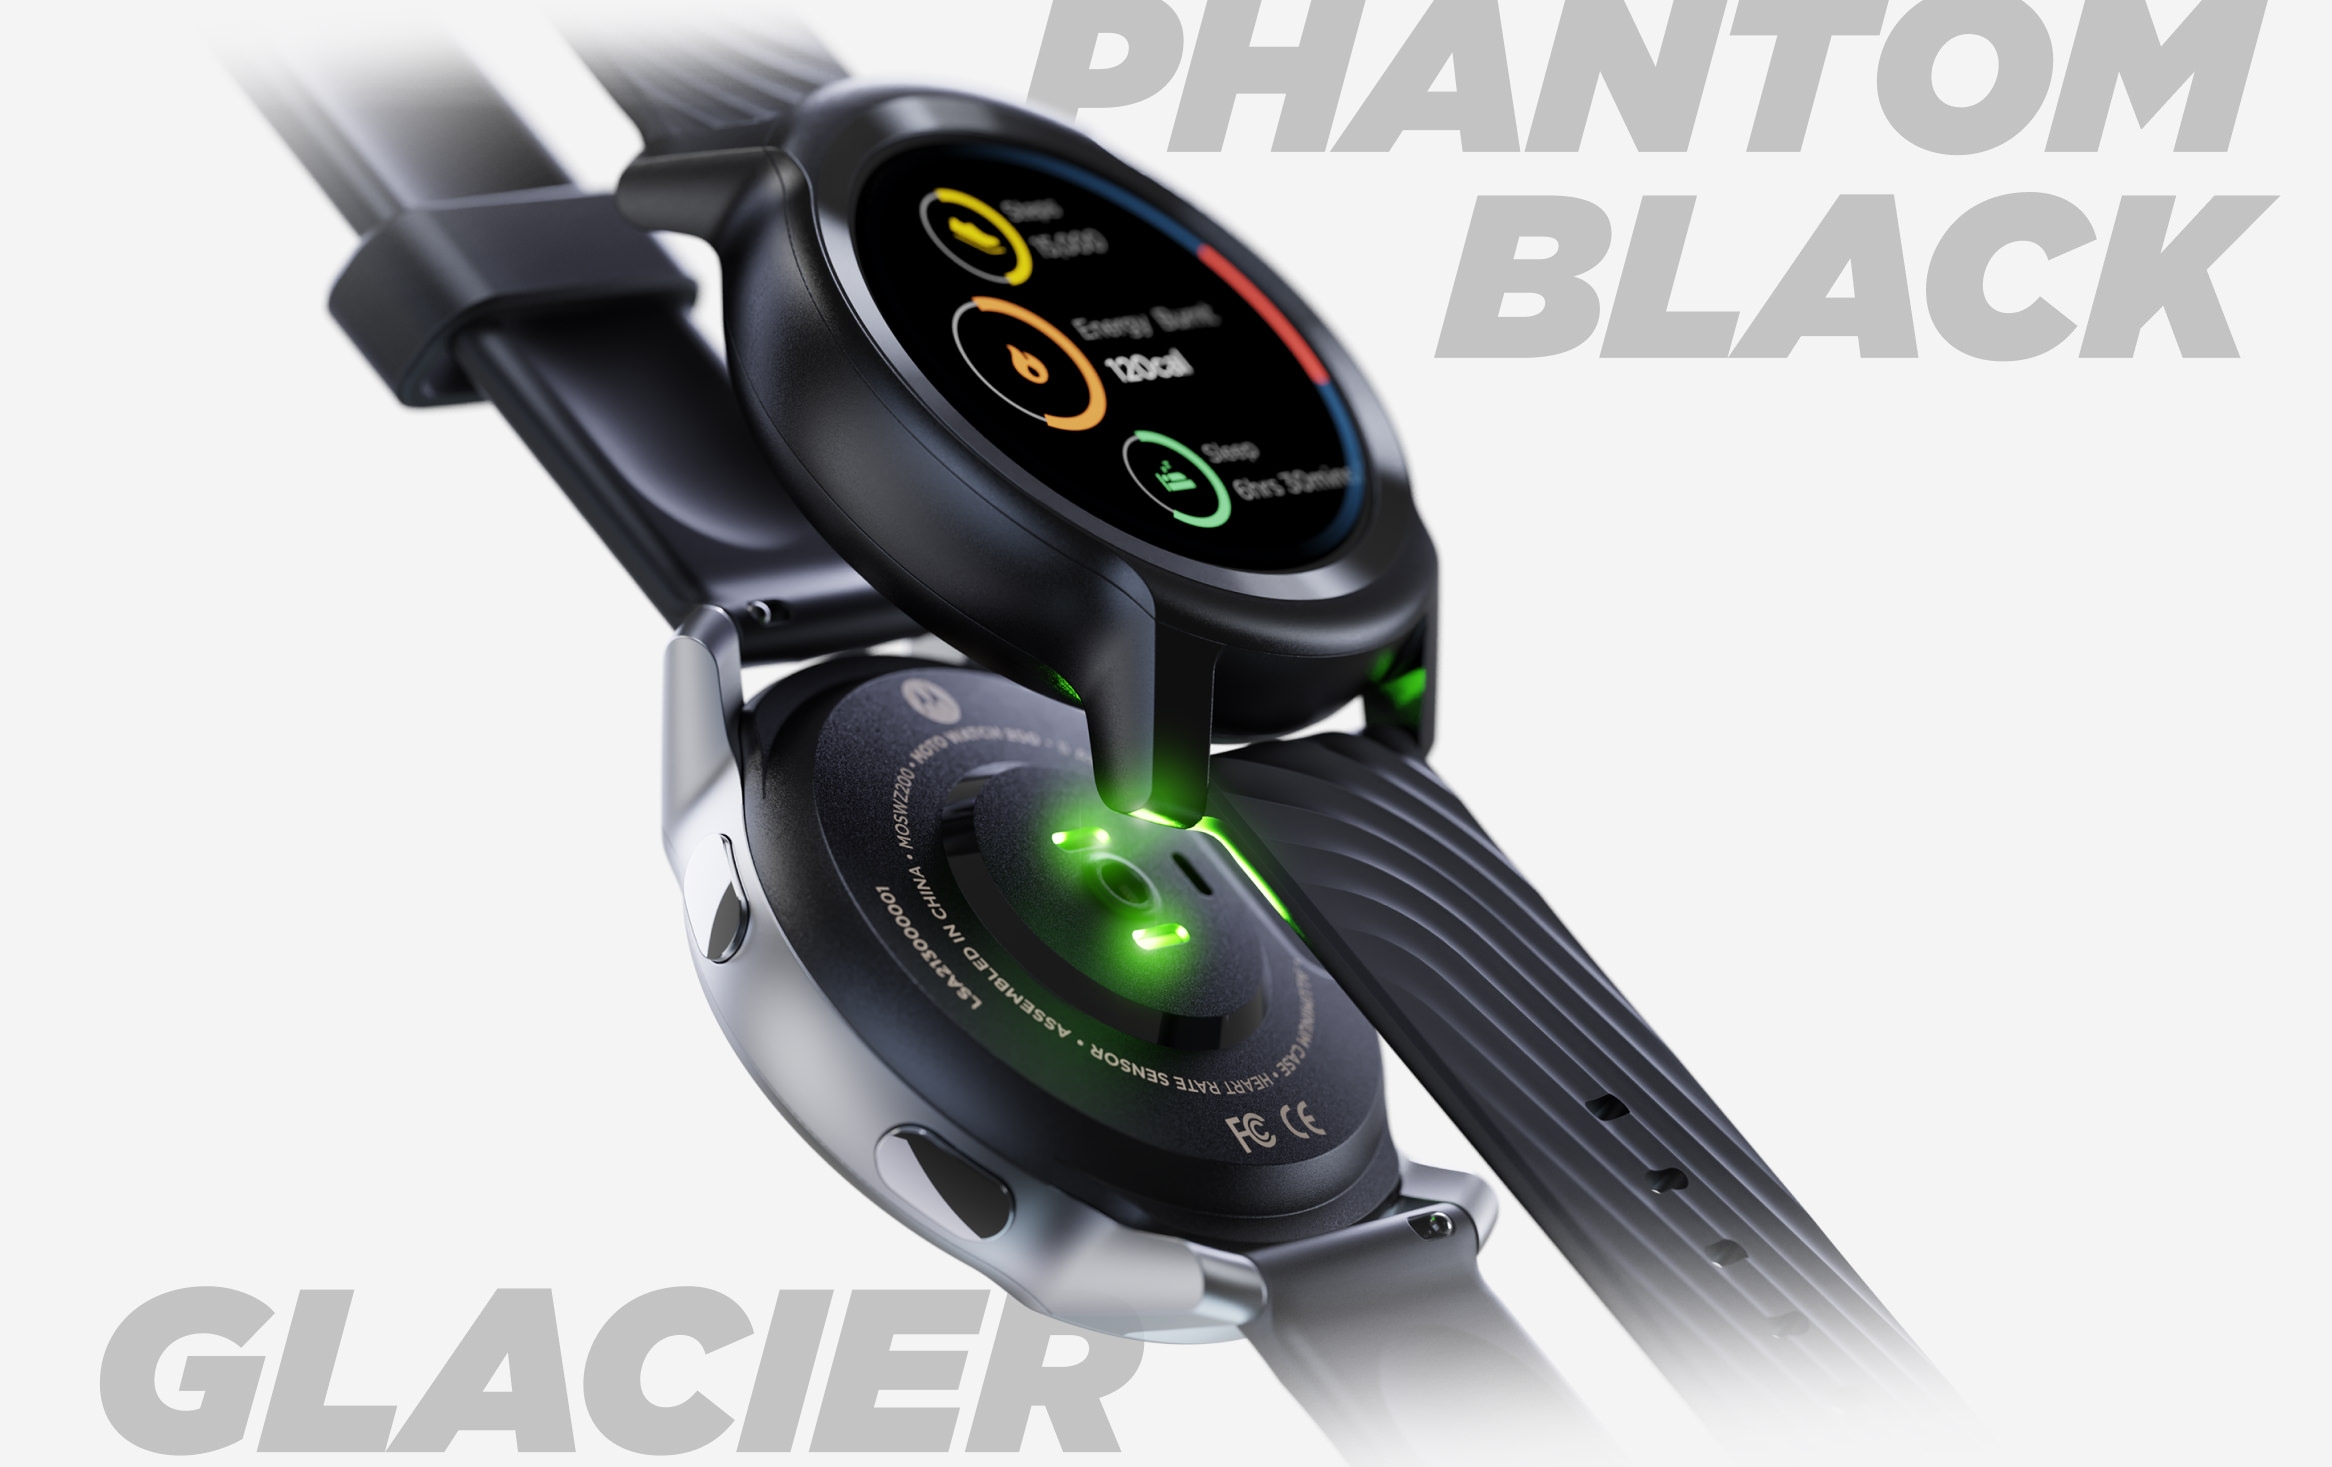 Moto Watch 100: 1.3″ display, SpO2 sensor, Moto OS, GPS and up to 14 days battery life for $99